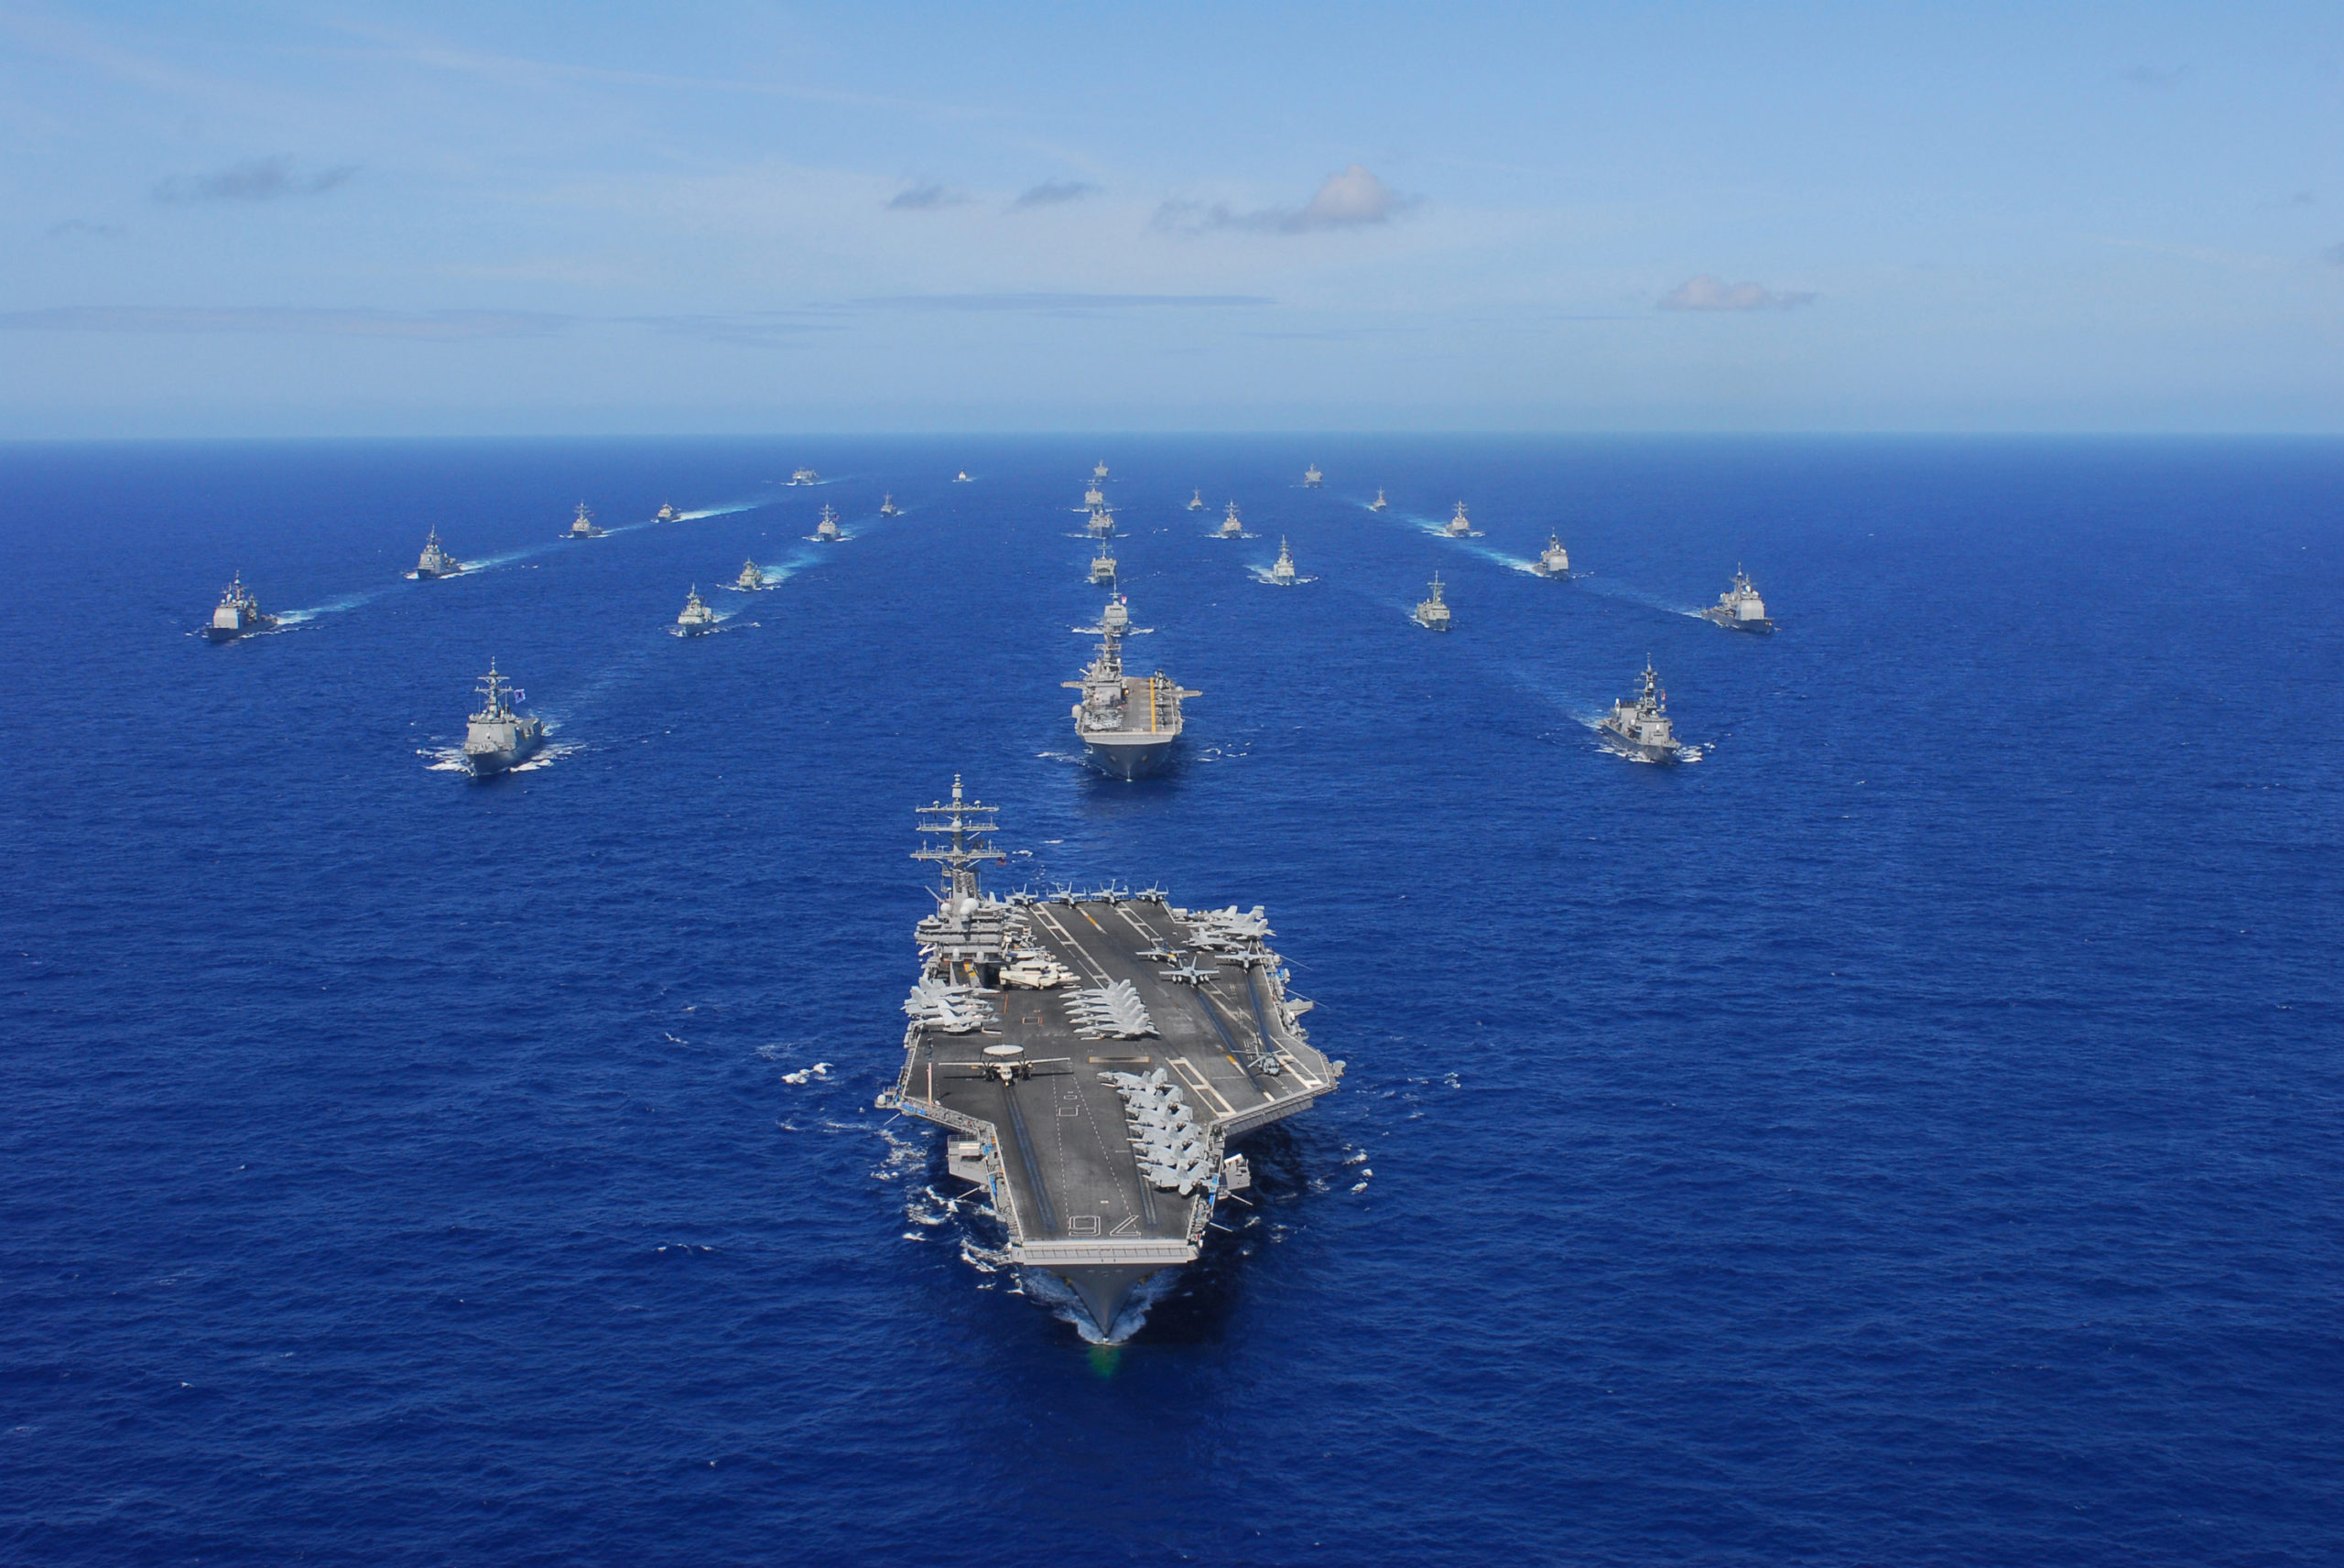 From Pivot to Defiance: American Policy Shift in the South China Sea